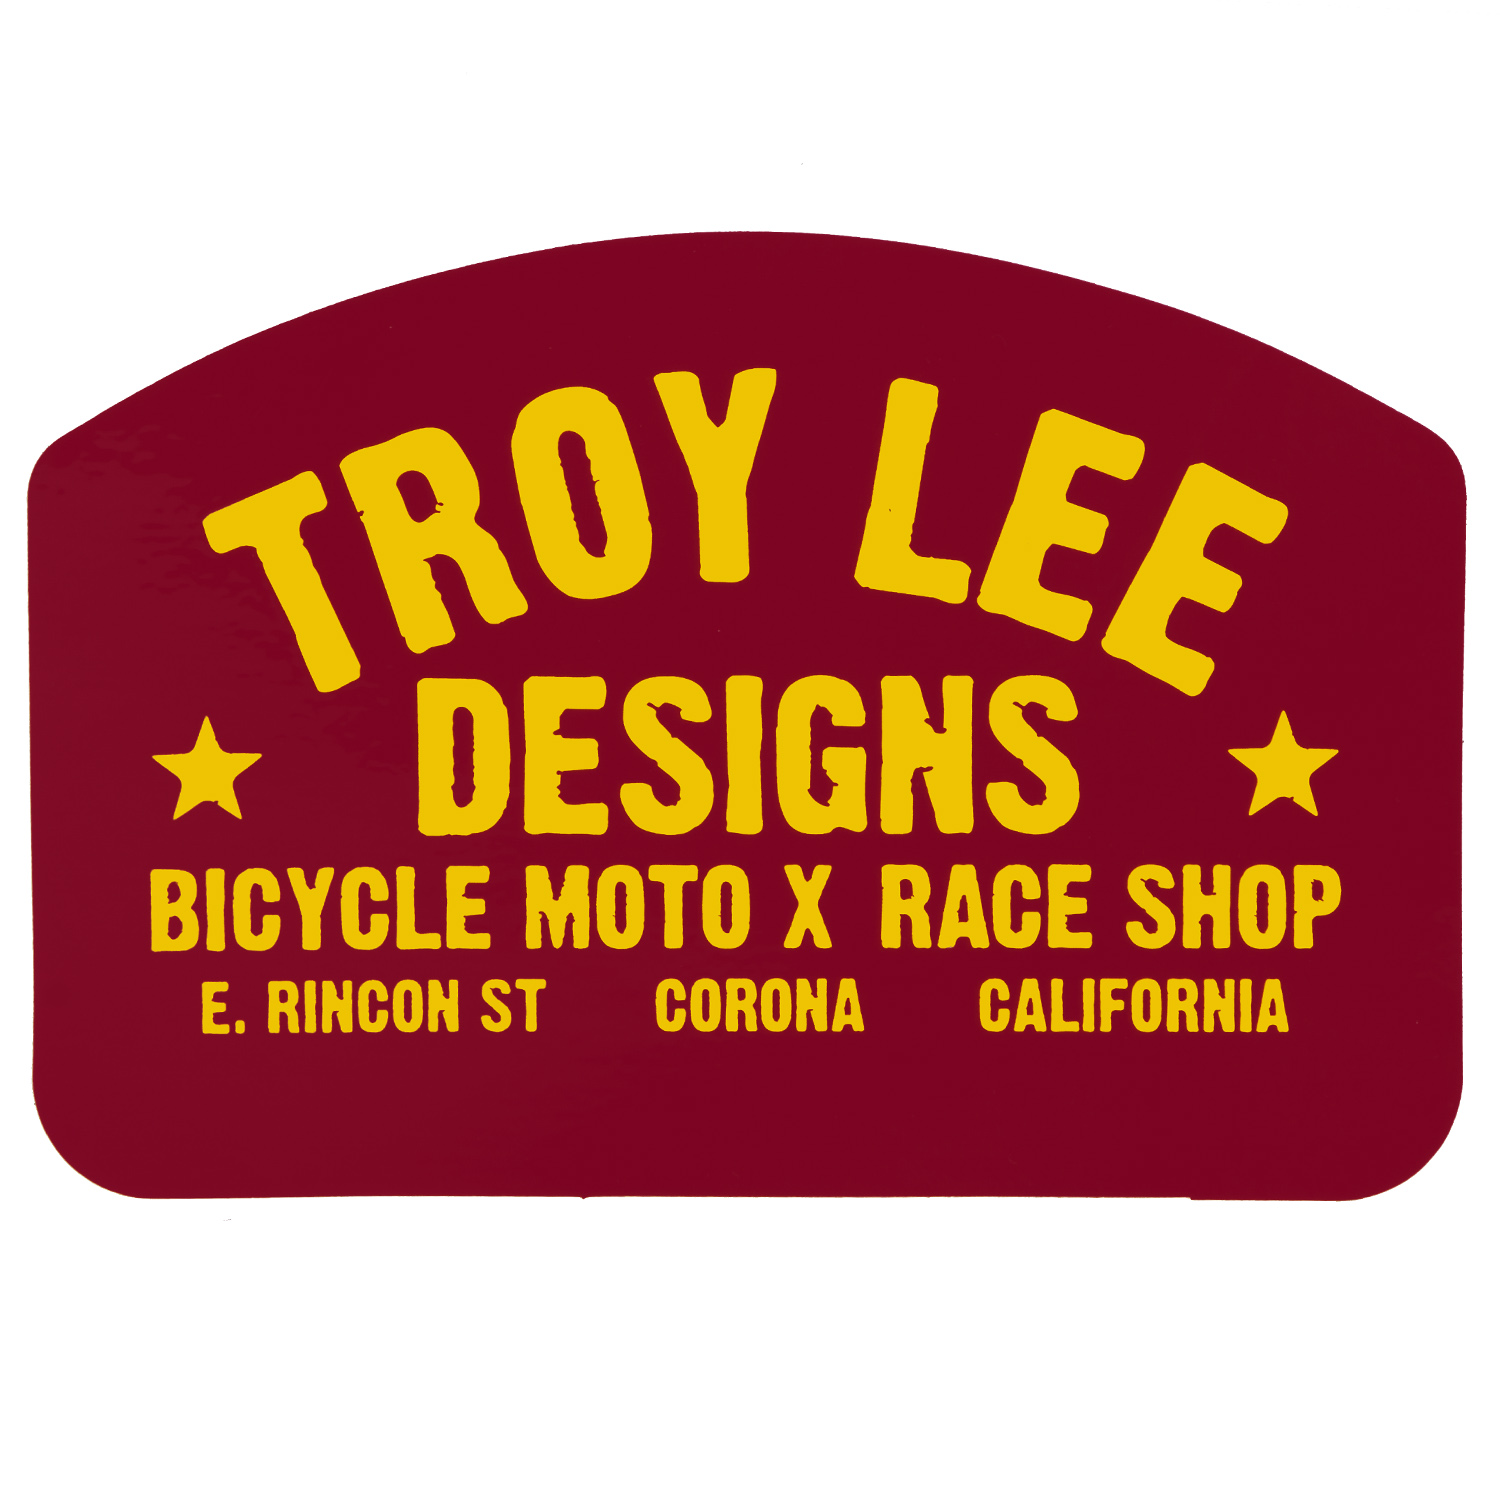 Troy Lee Designs Sticker Race Shop Red/Yellow - 3.5 inches